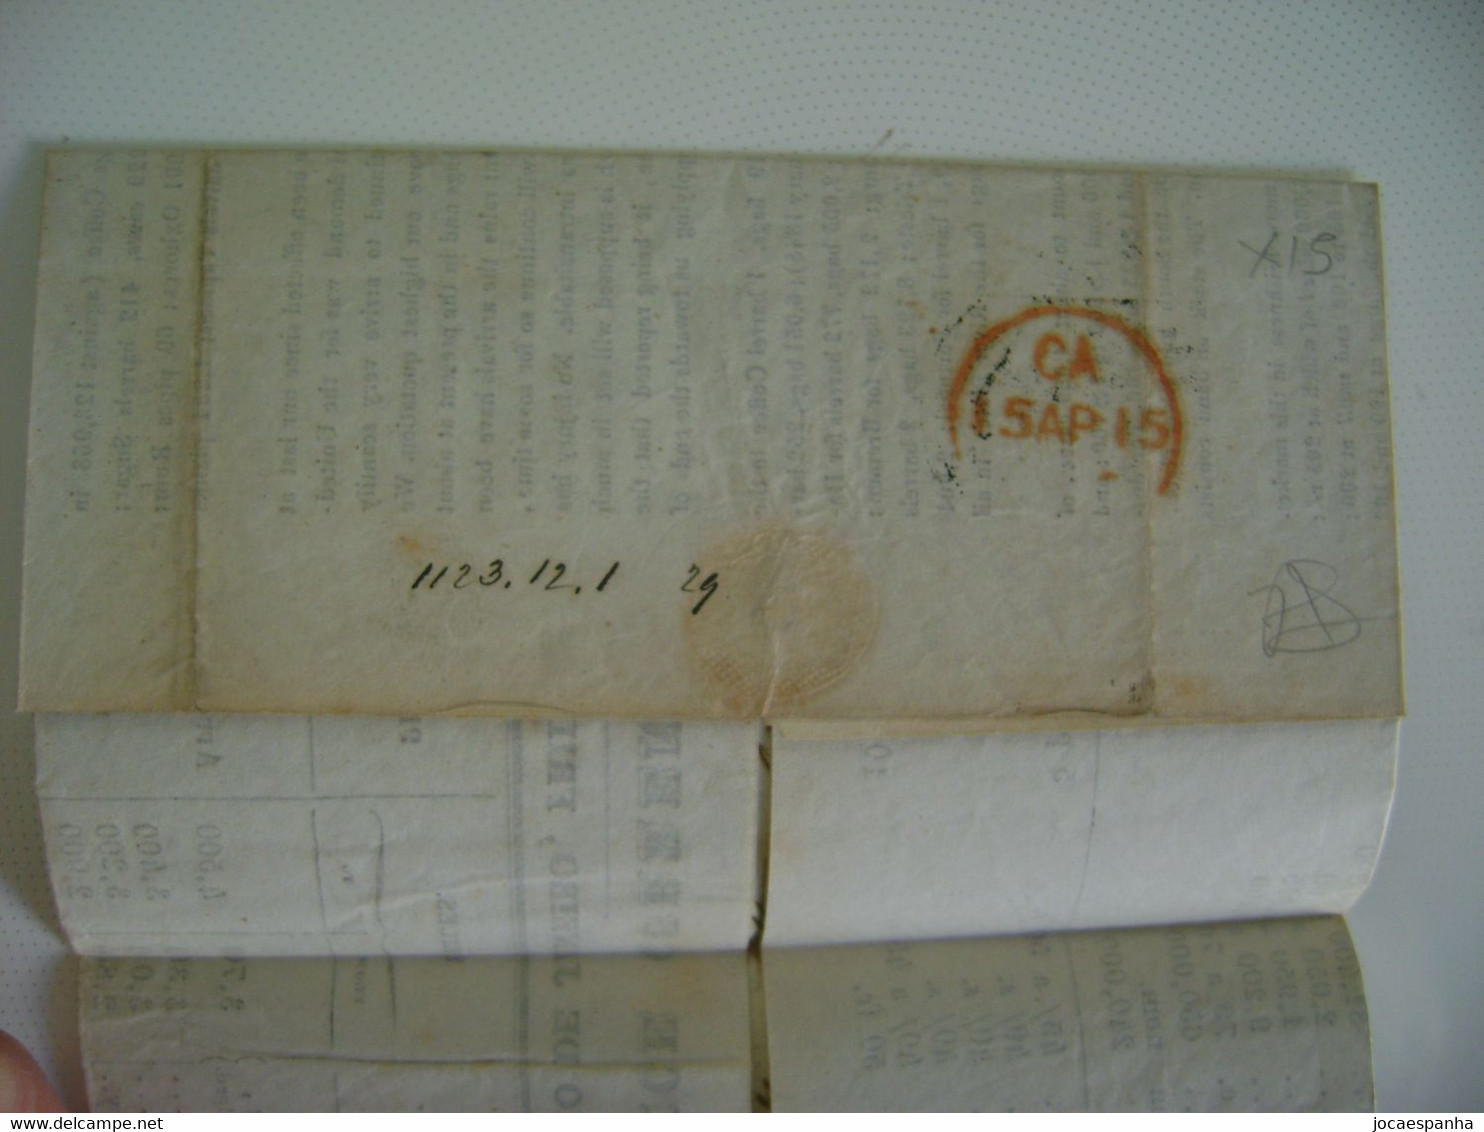 BRAZIL / BRASIL - MARITIME LETTER WITH POSTAL MARK SENT FROM RIO DE JANEIRO TO LONDON IN 1846 IN THE STATE - Briefe U. Dokumente